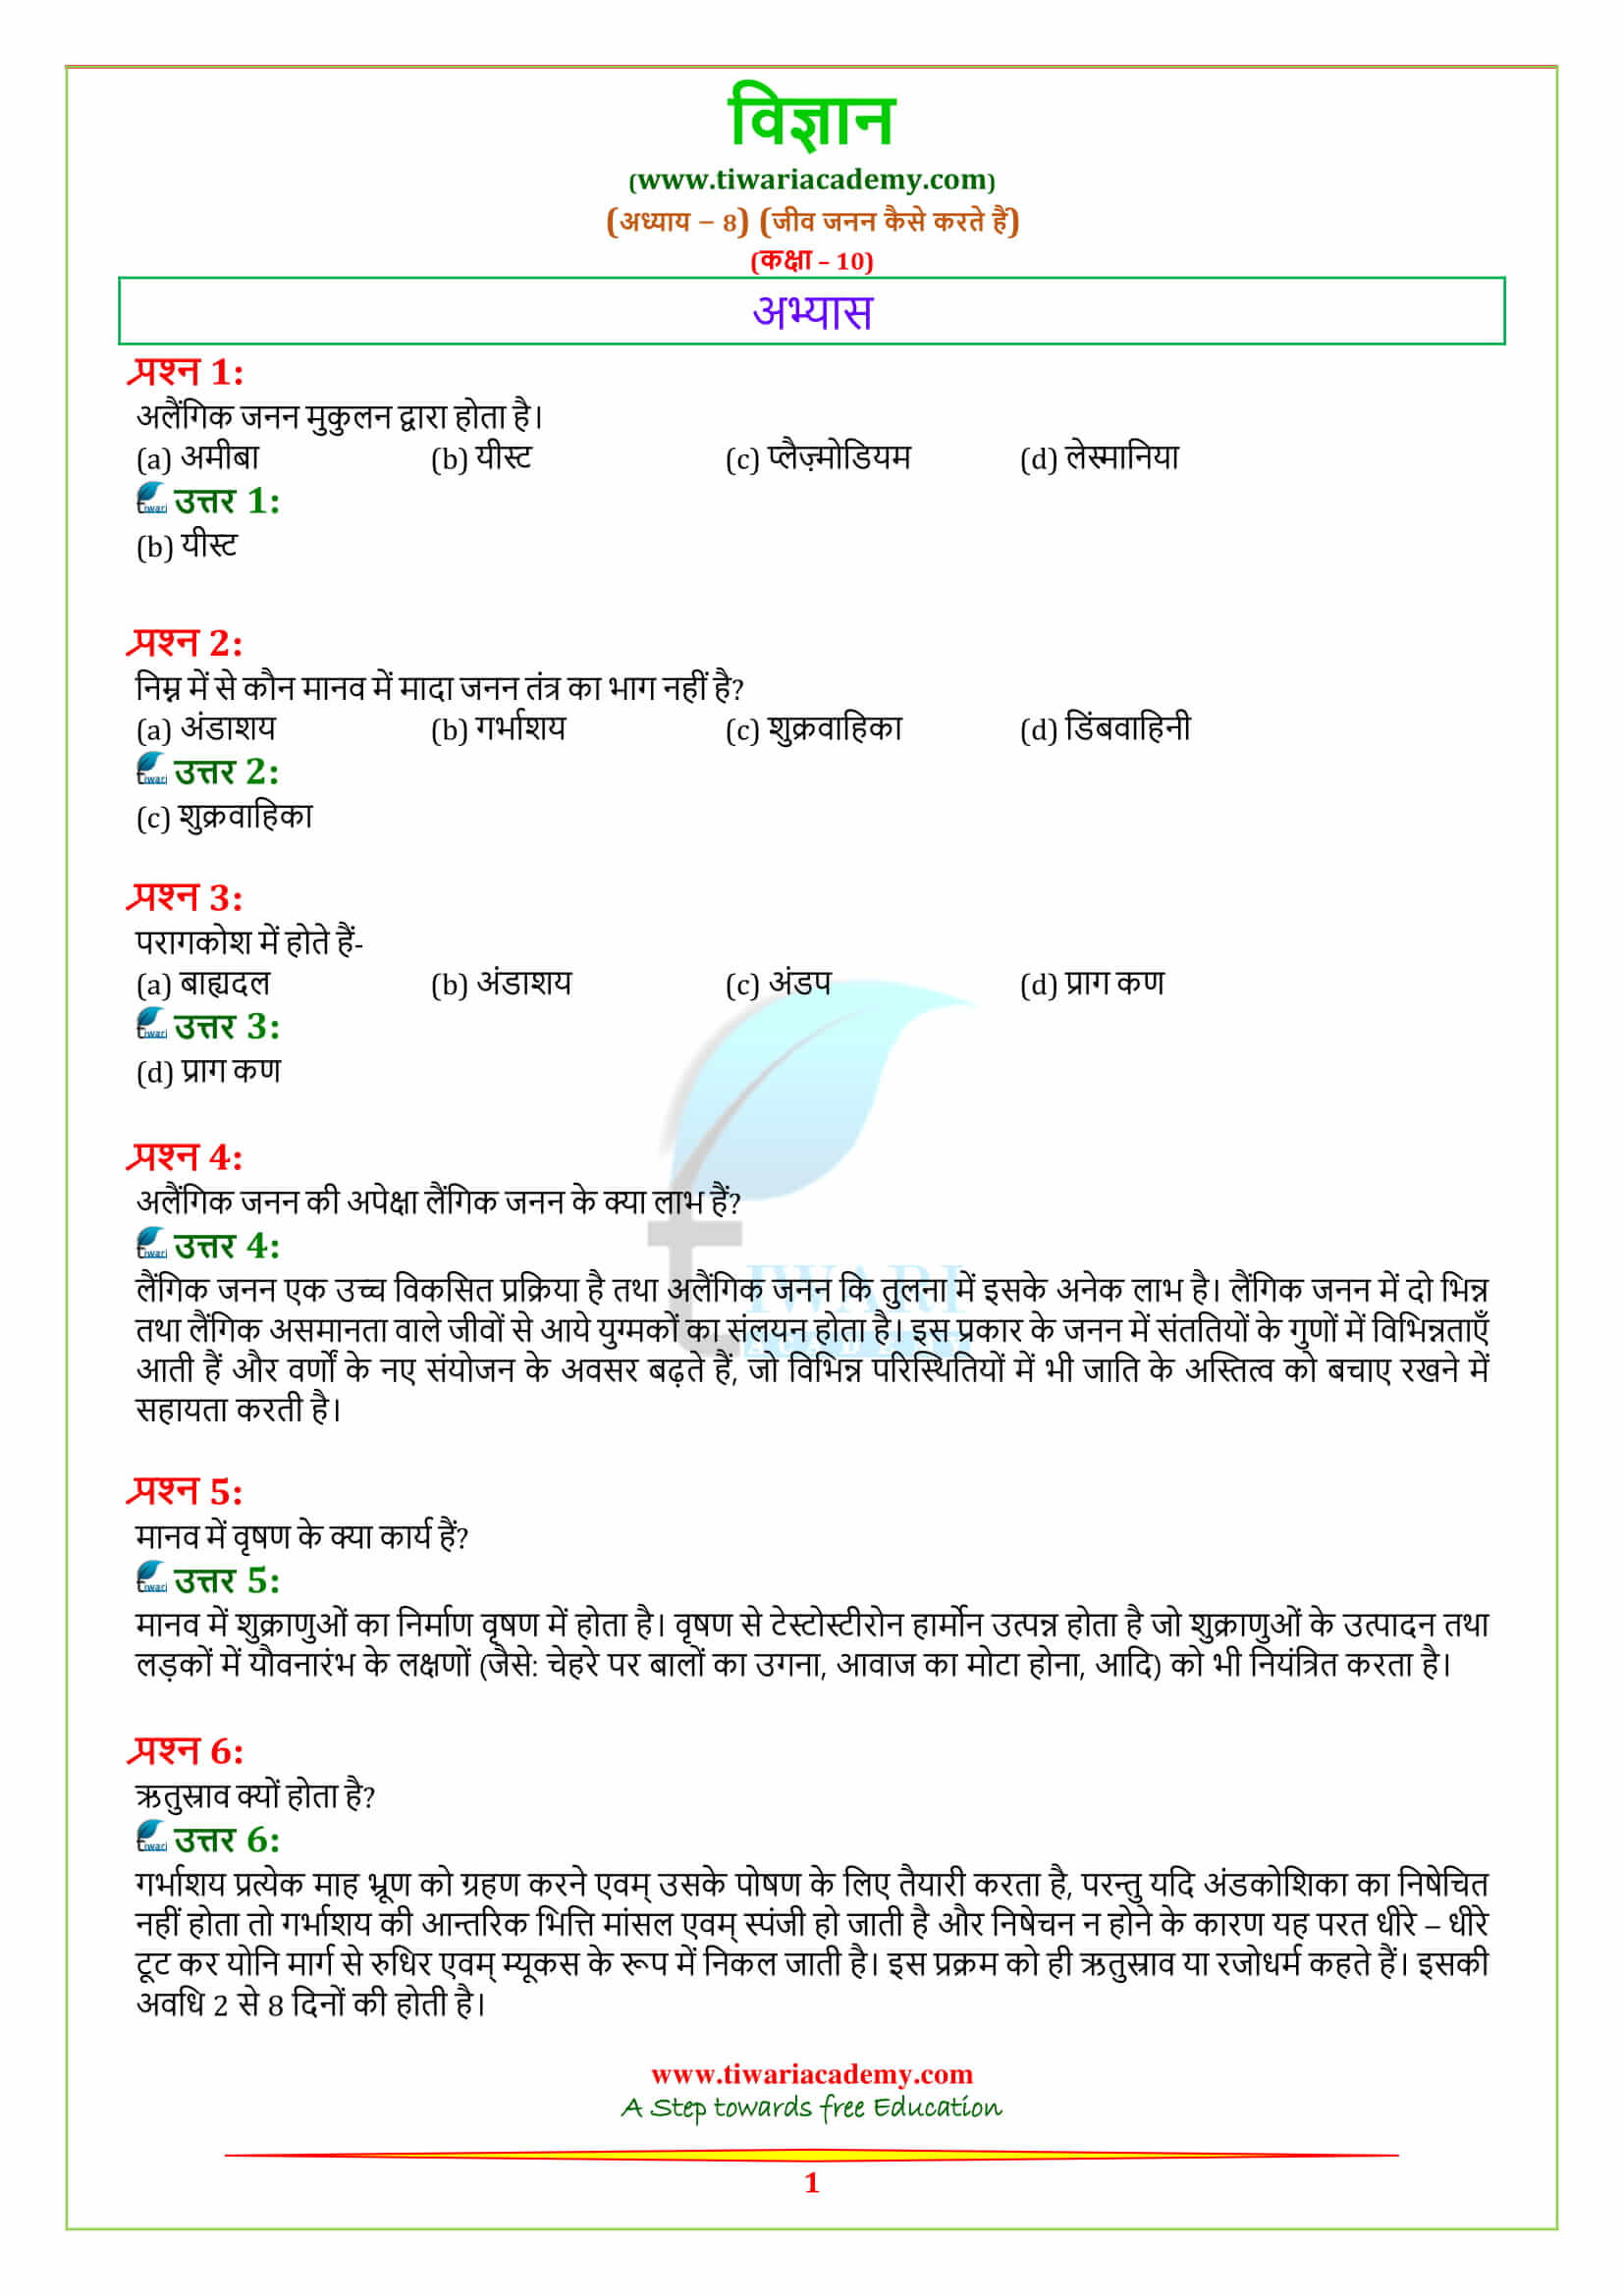 NCERT Solutions for Class 10 Science Chapter 8 How do Organisms Reproduce? अभ्यास के प्रश्न उत्तर